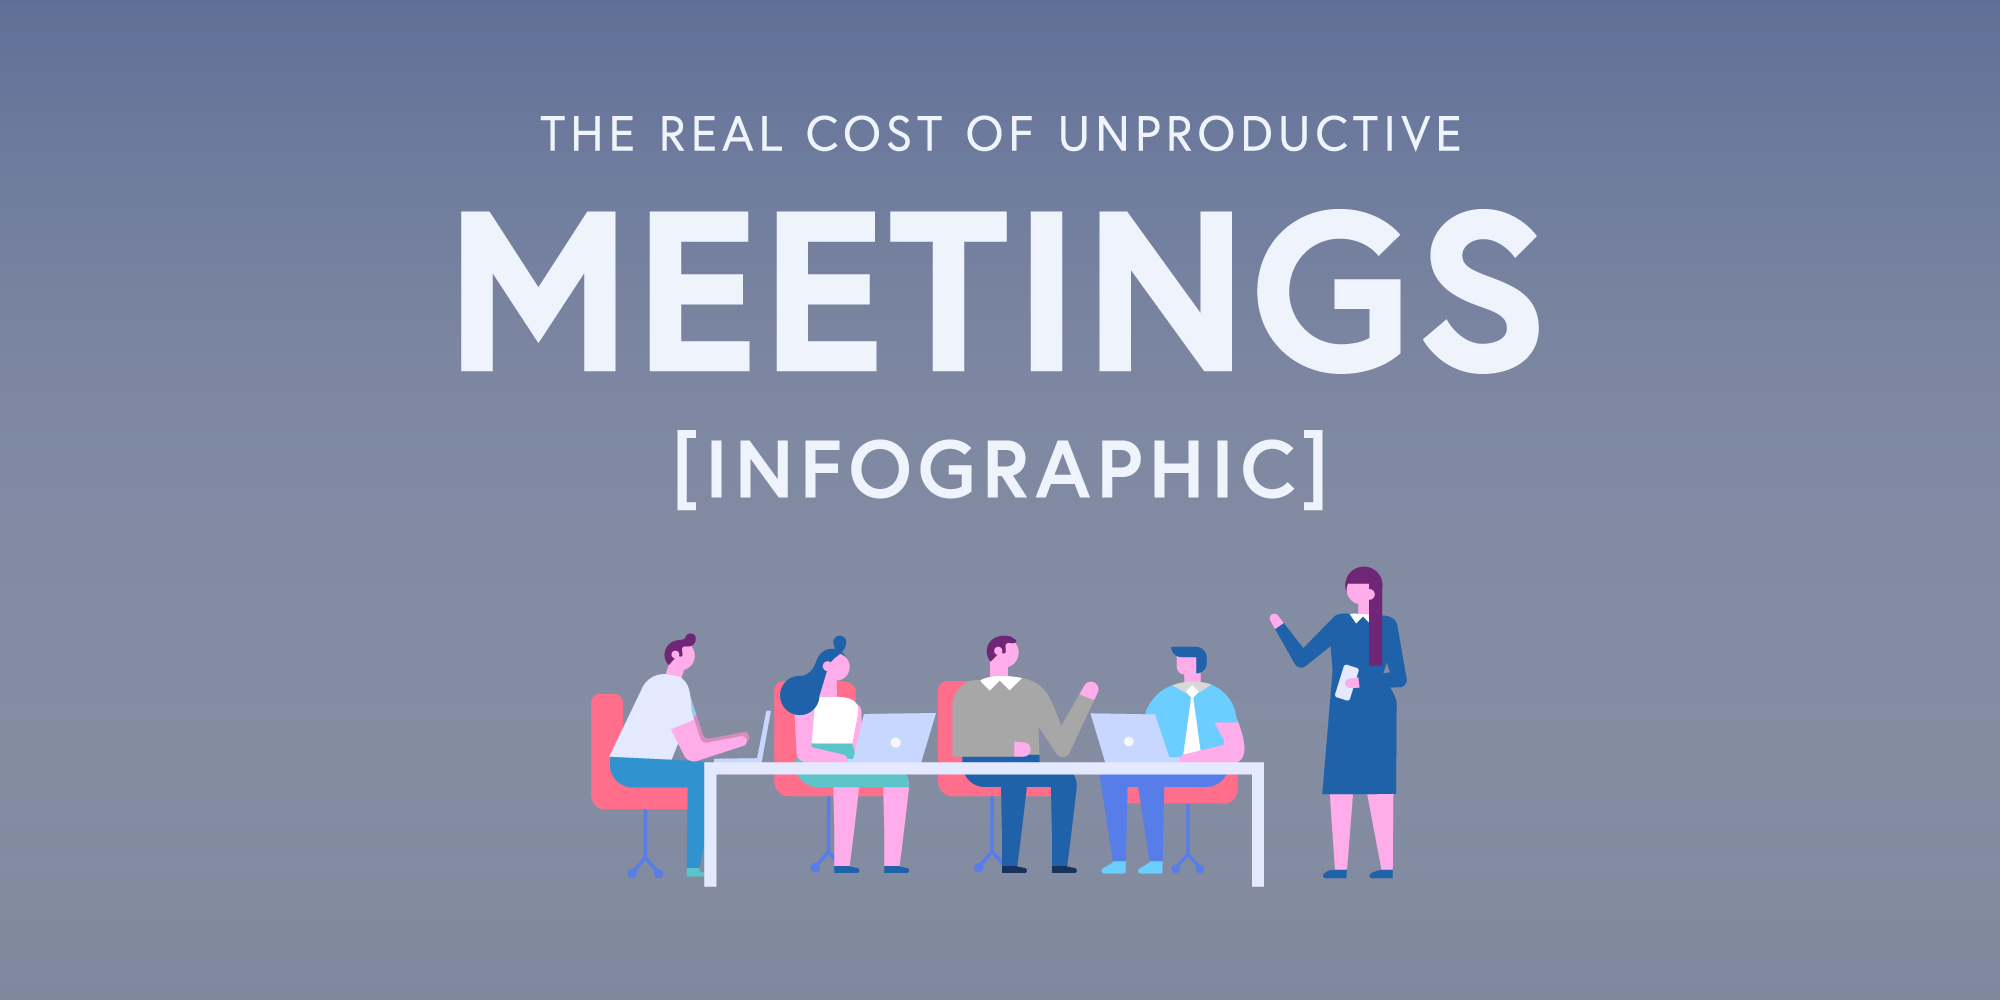 The real cost of unproductive meetings